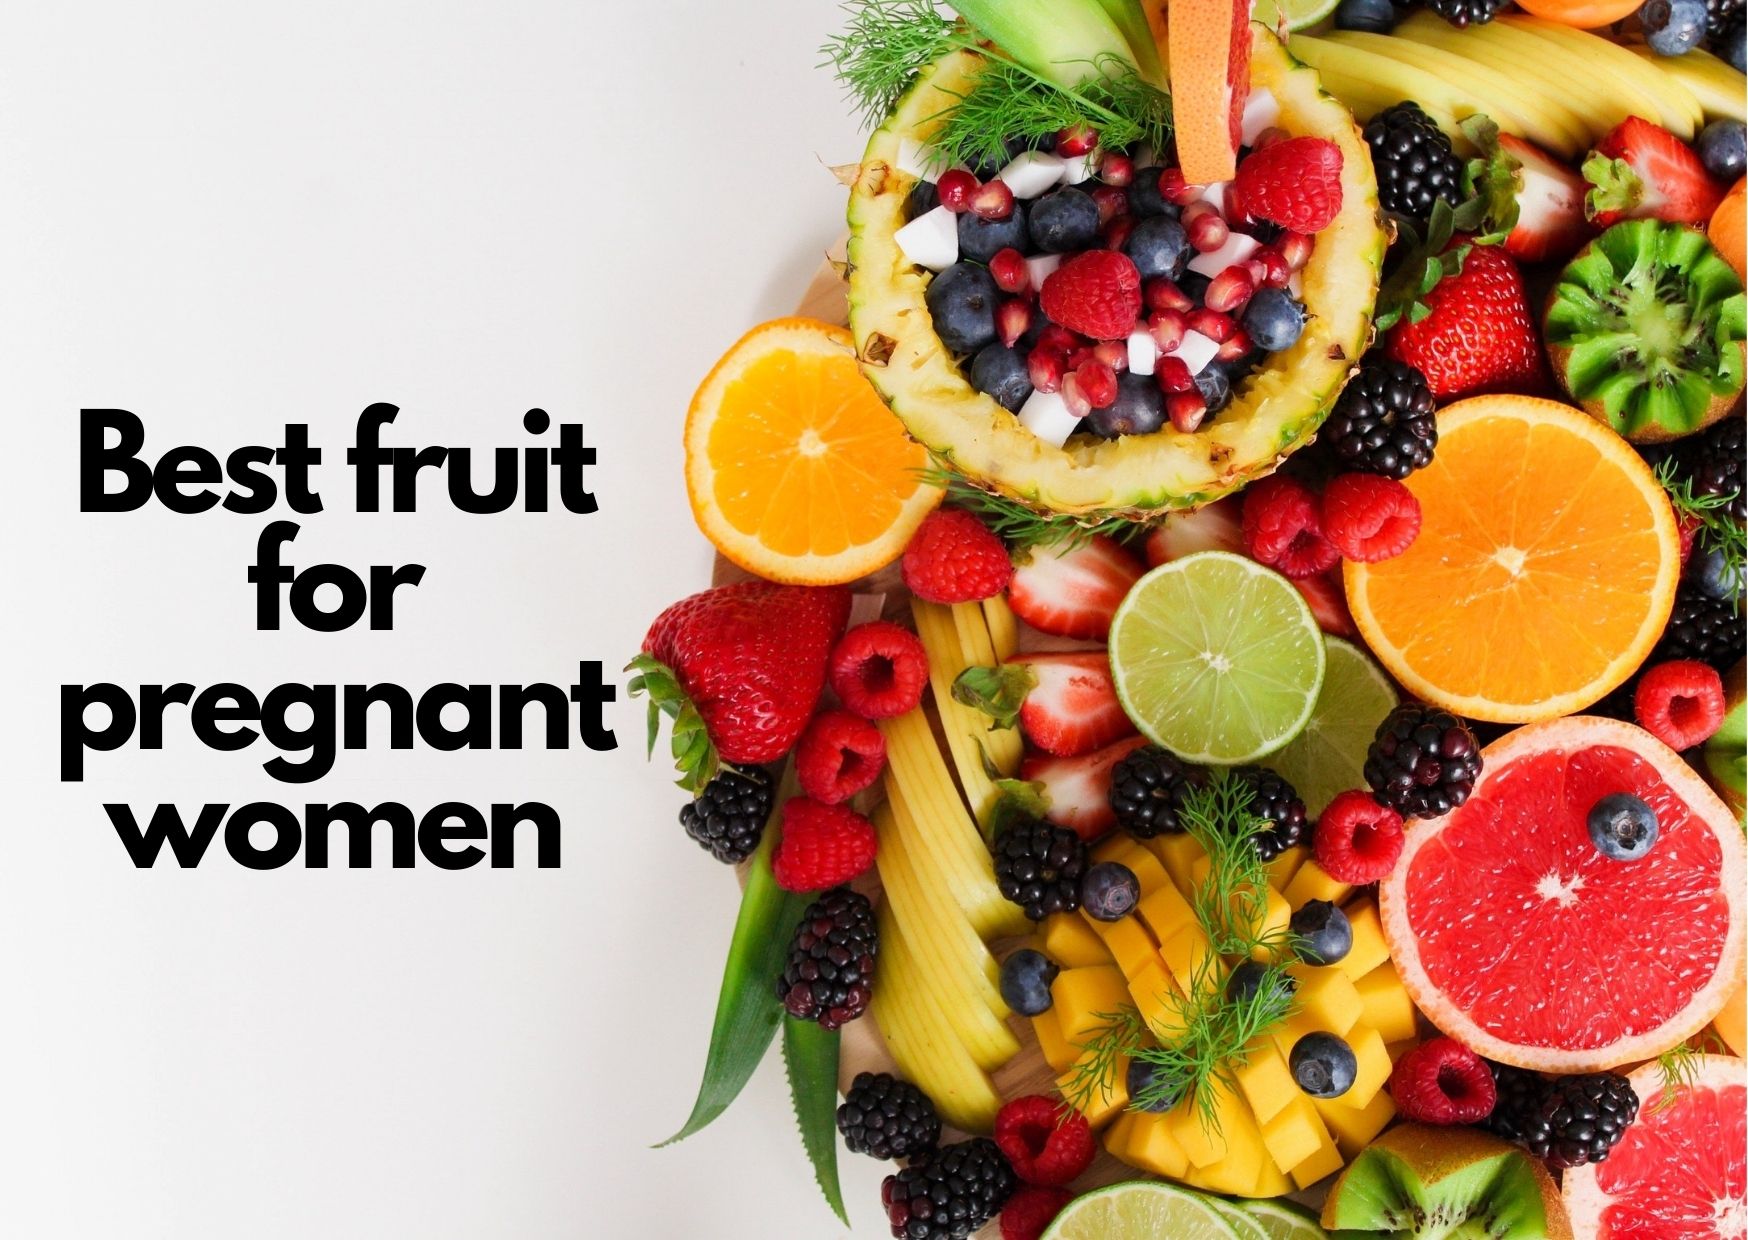 Pregnancy Diet: The Best Fruits to Eat During Pregnancy